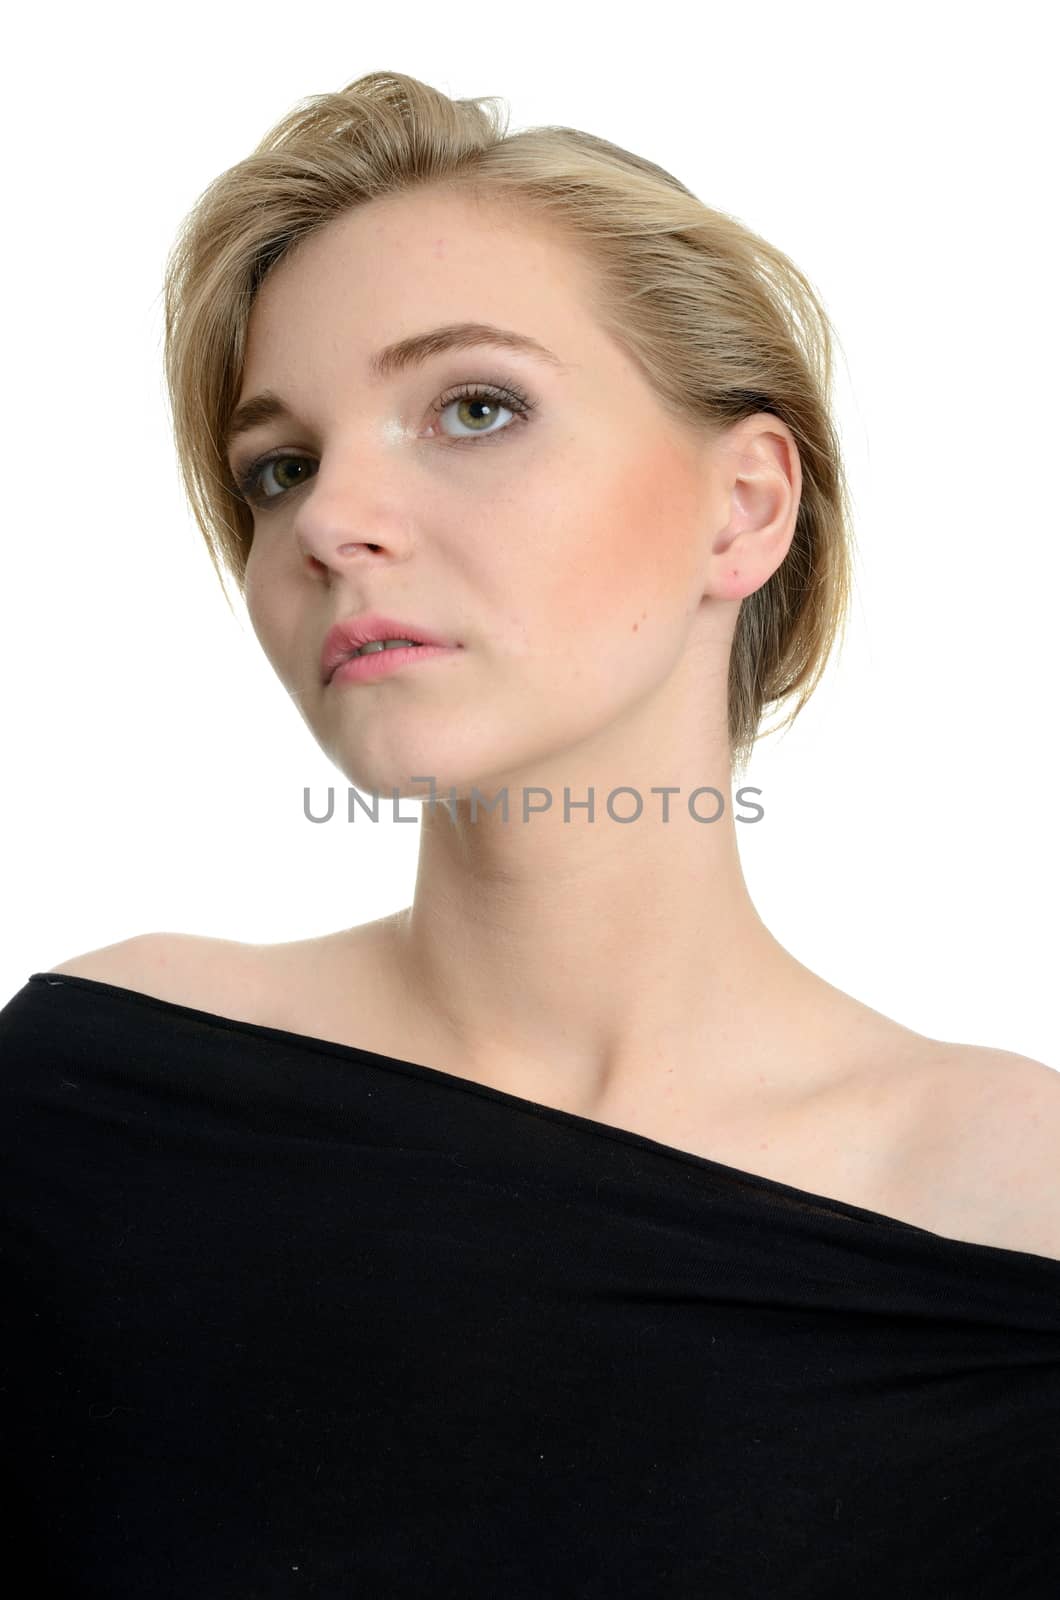 Female model portrait. Blond girl with nobel face expression, wearing black top.